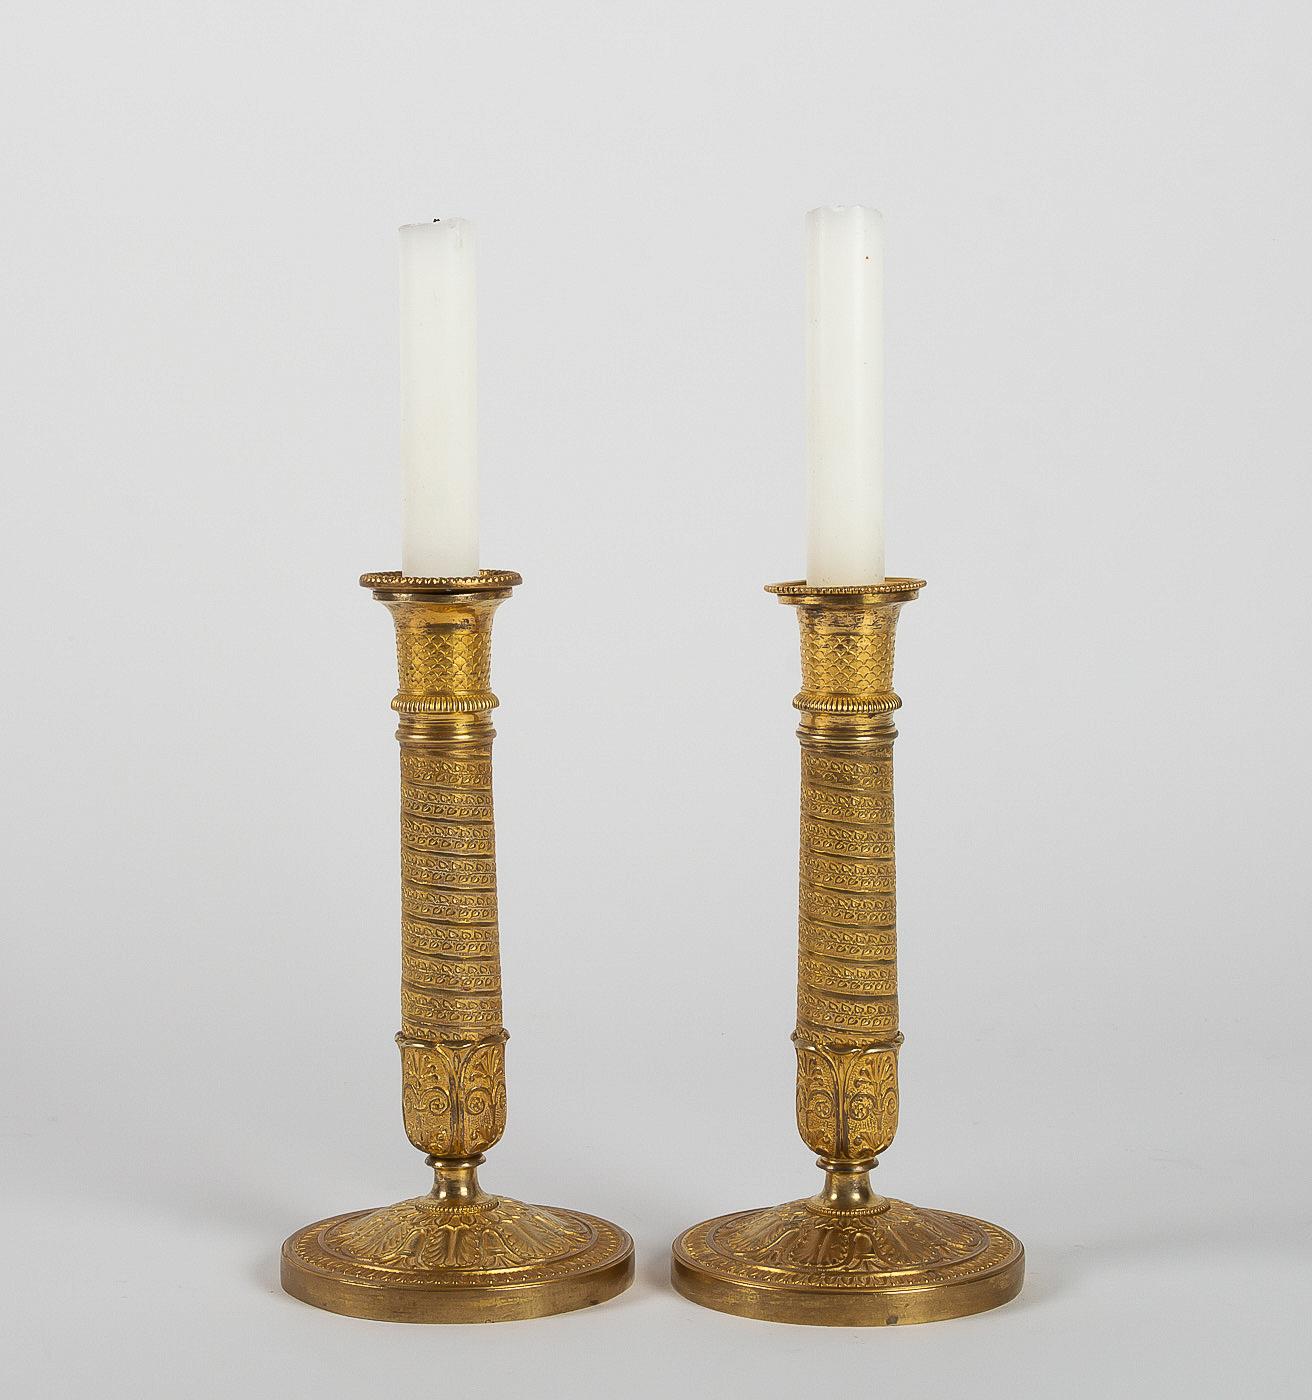 French Empire Period, Pair of Small Chiseled Gilt-Bronze Candlesticks Circa 1805 8